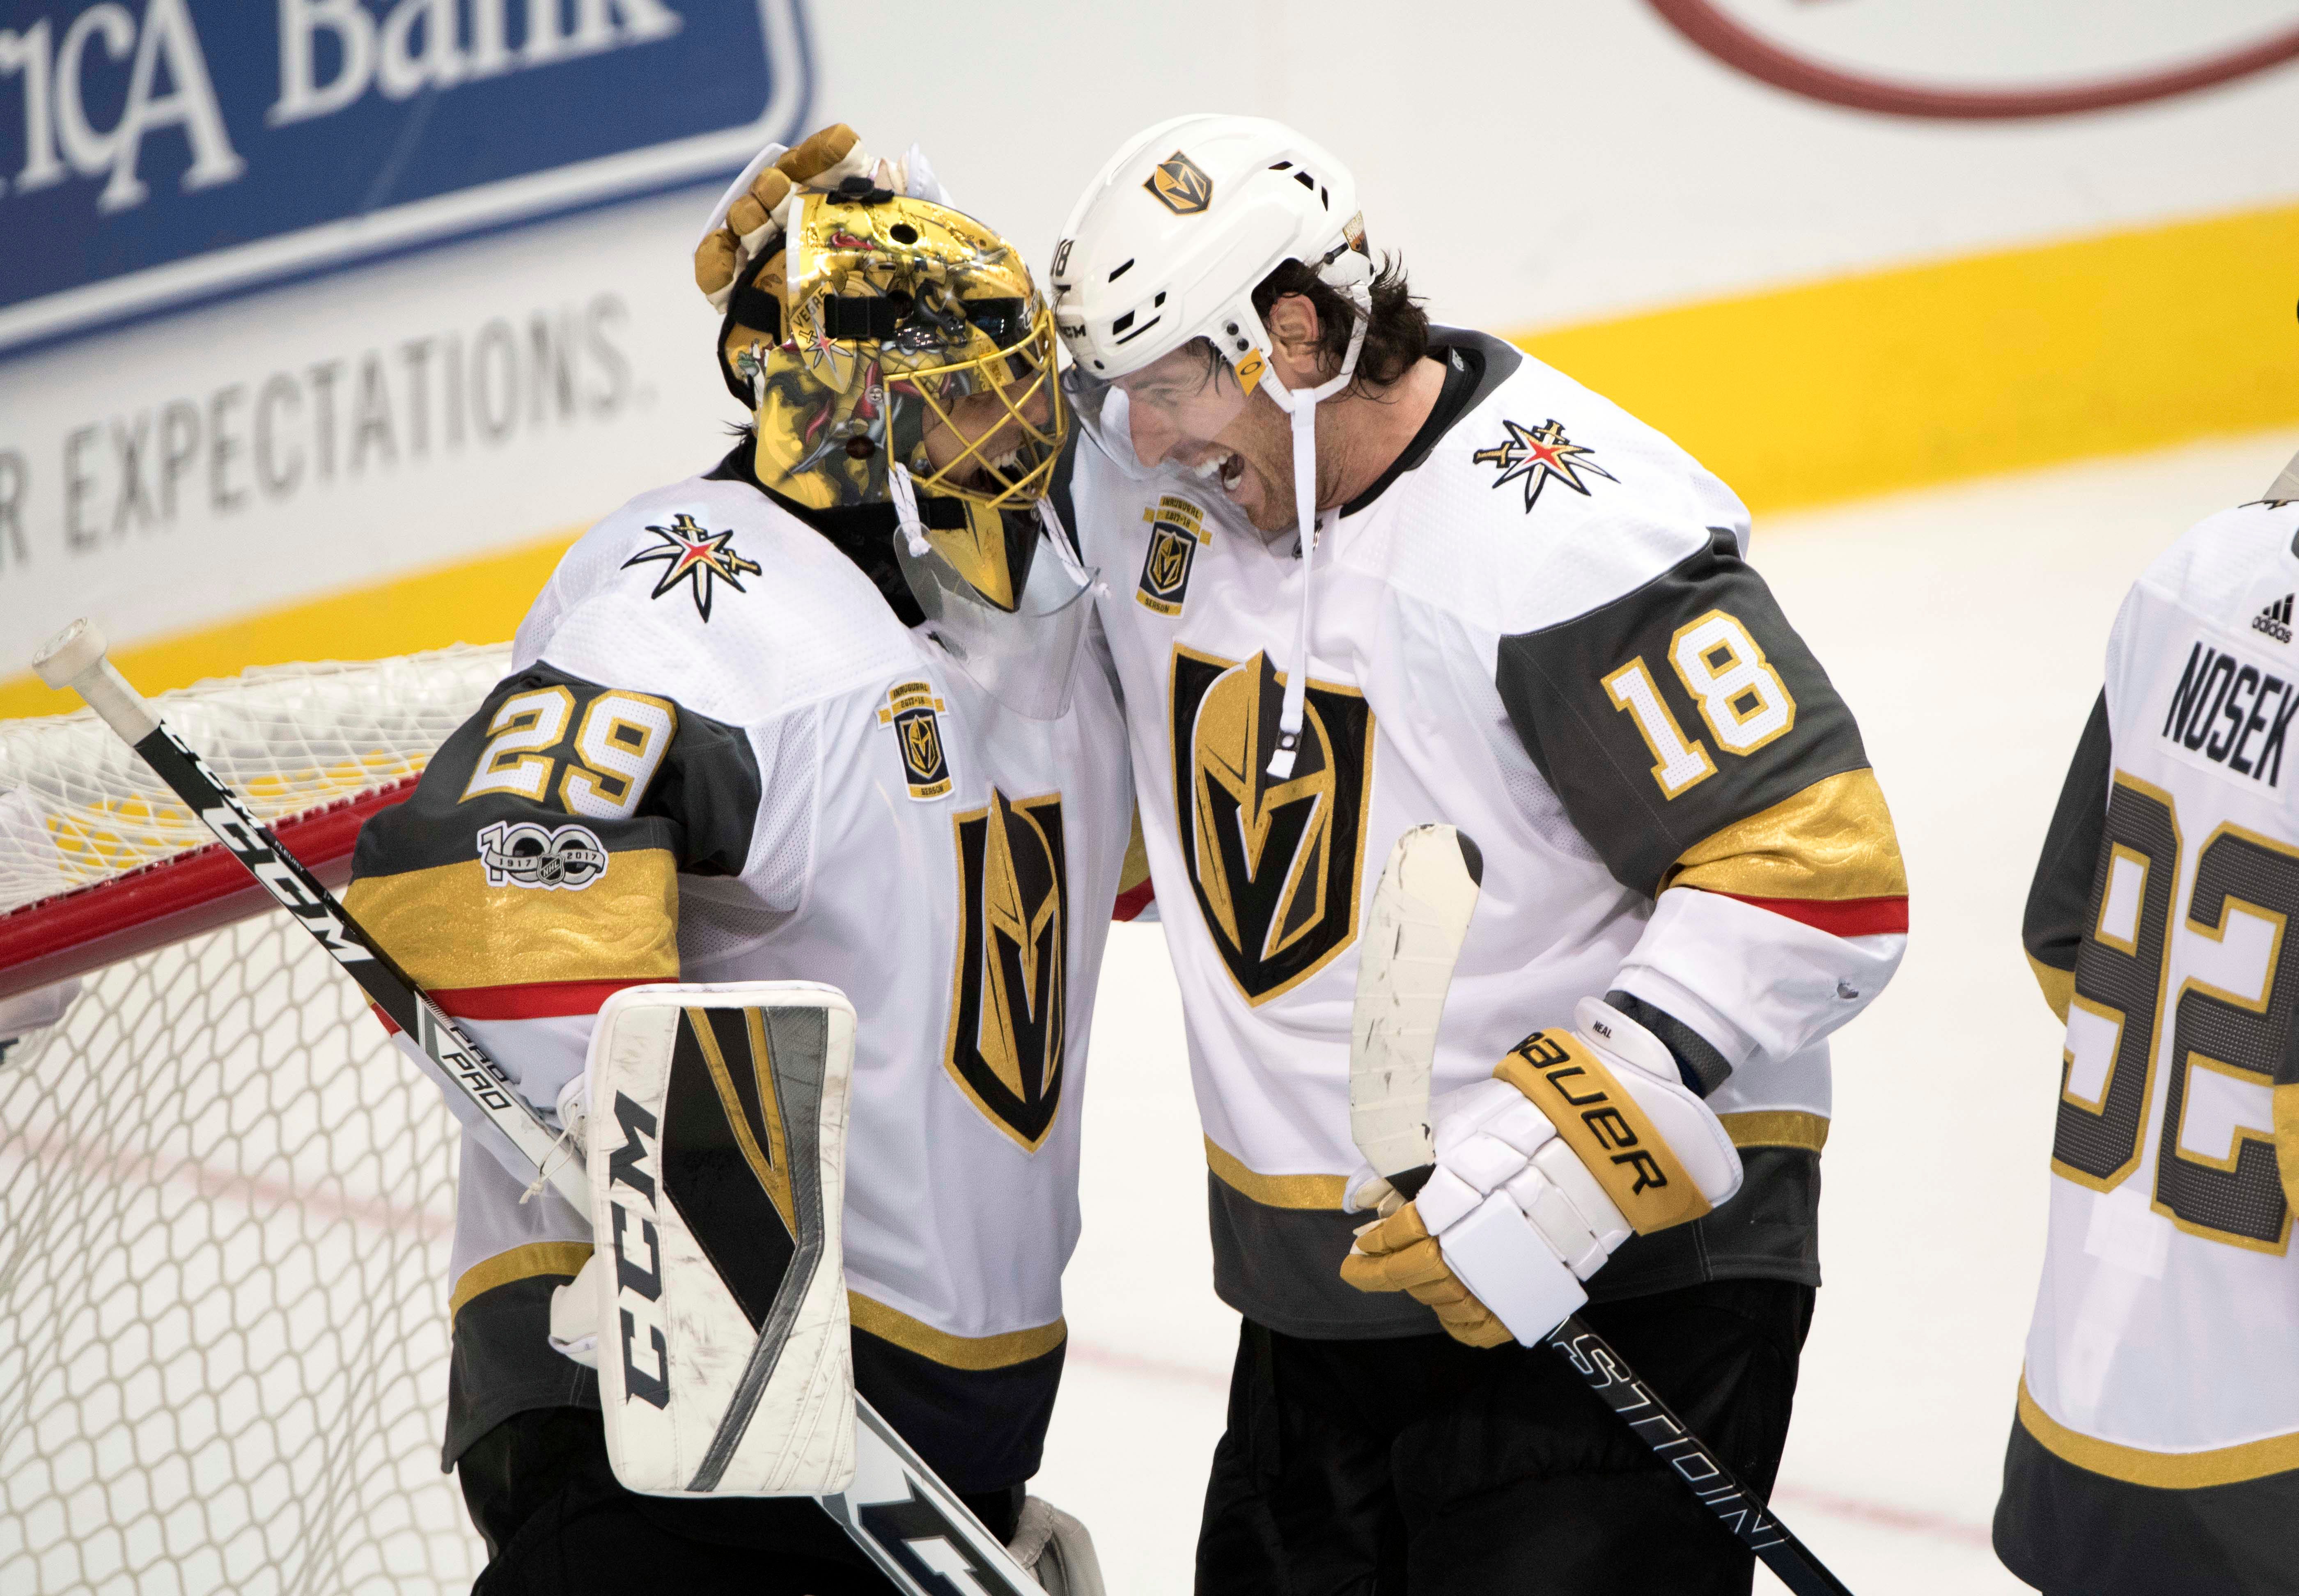 Marc-Andre Fleury, James Neal help Vegas Golden Knights win first game